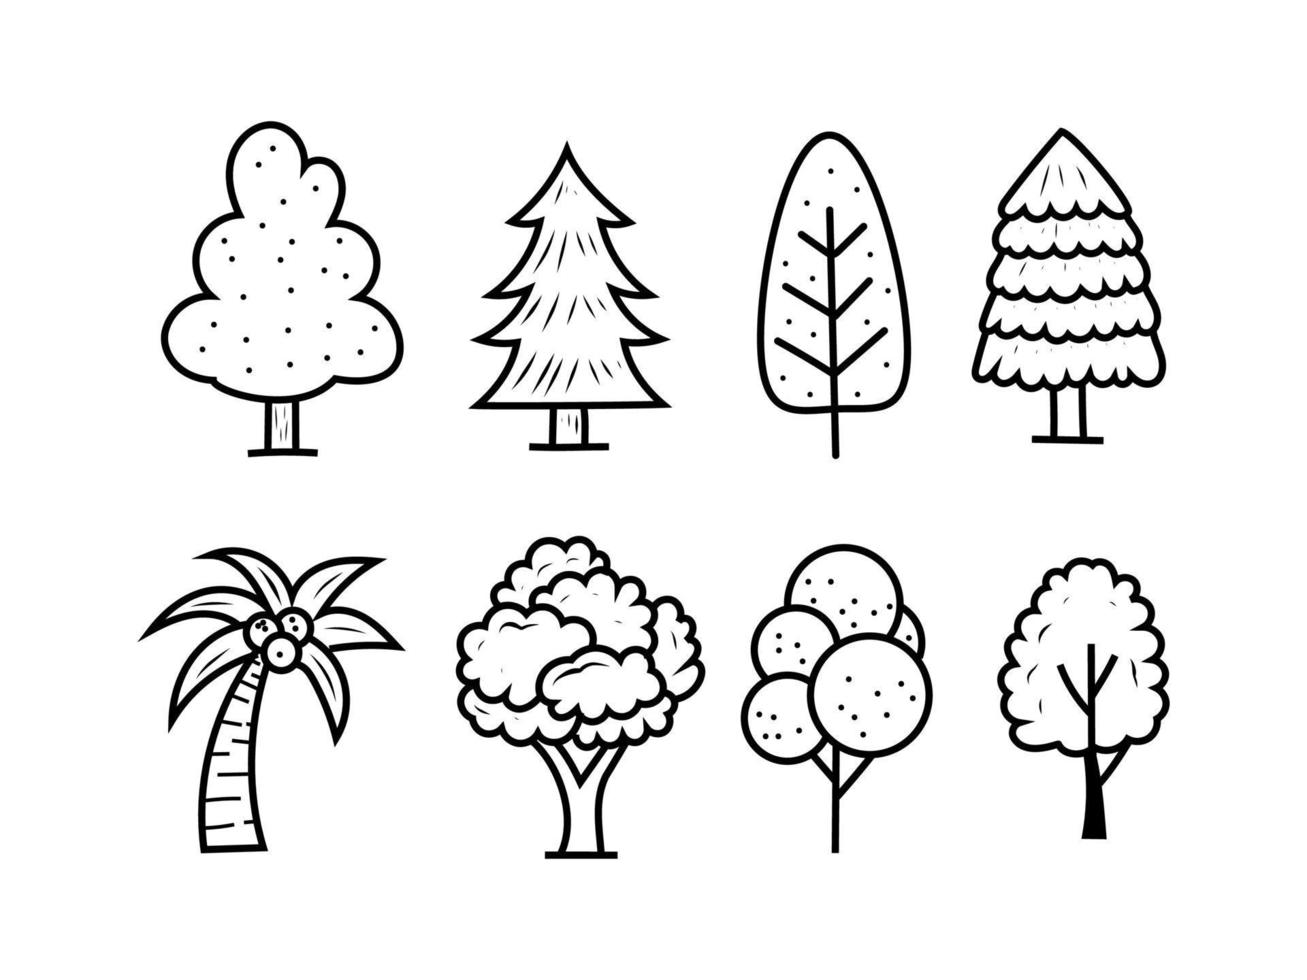 Set of tree vector illustrations with cute hand-drawn style isolated on white background. Tree doodle illustration